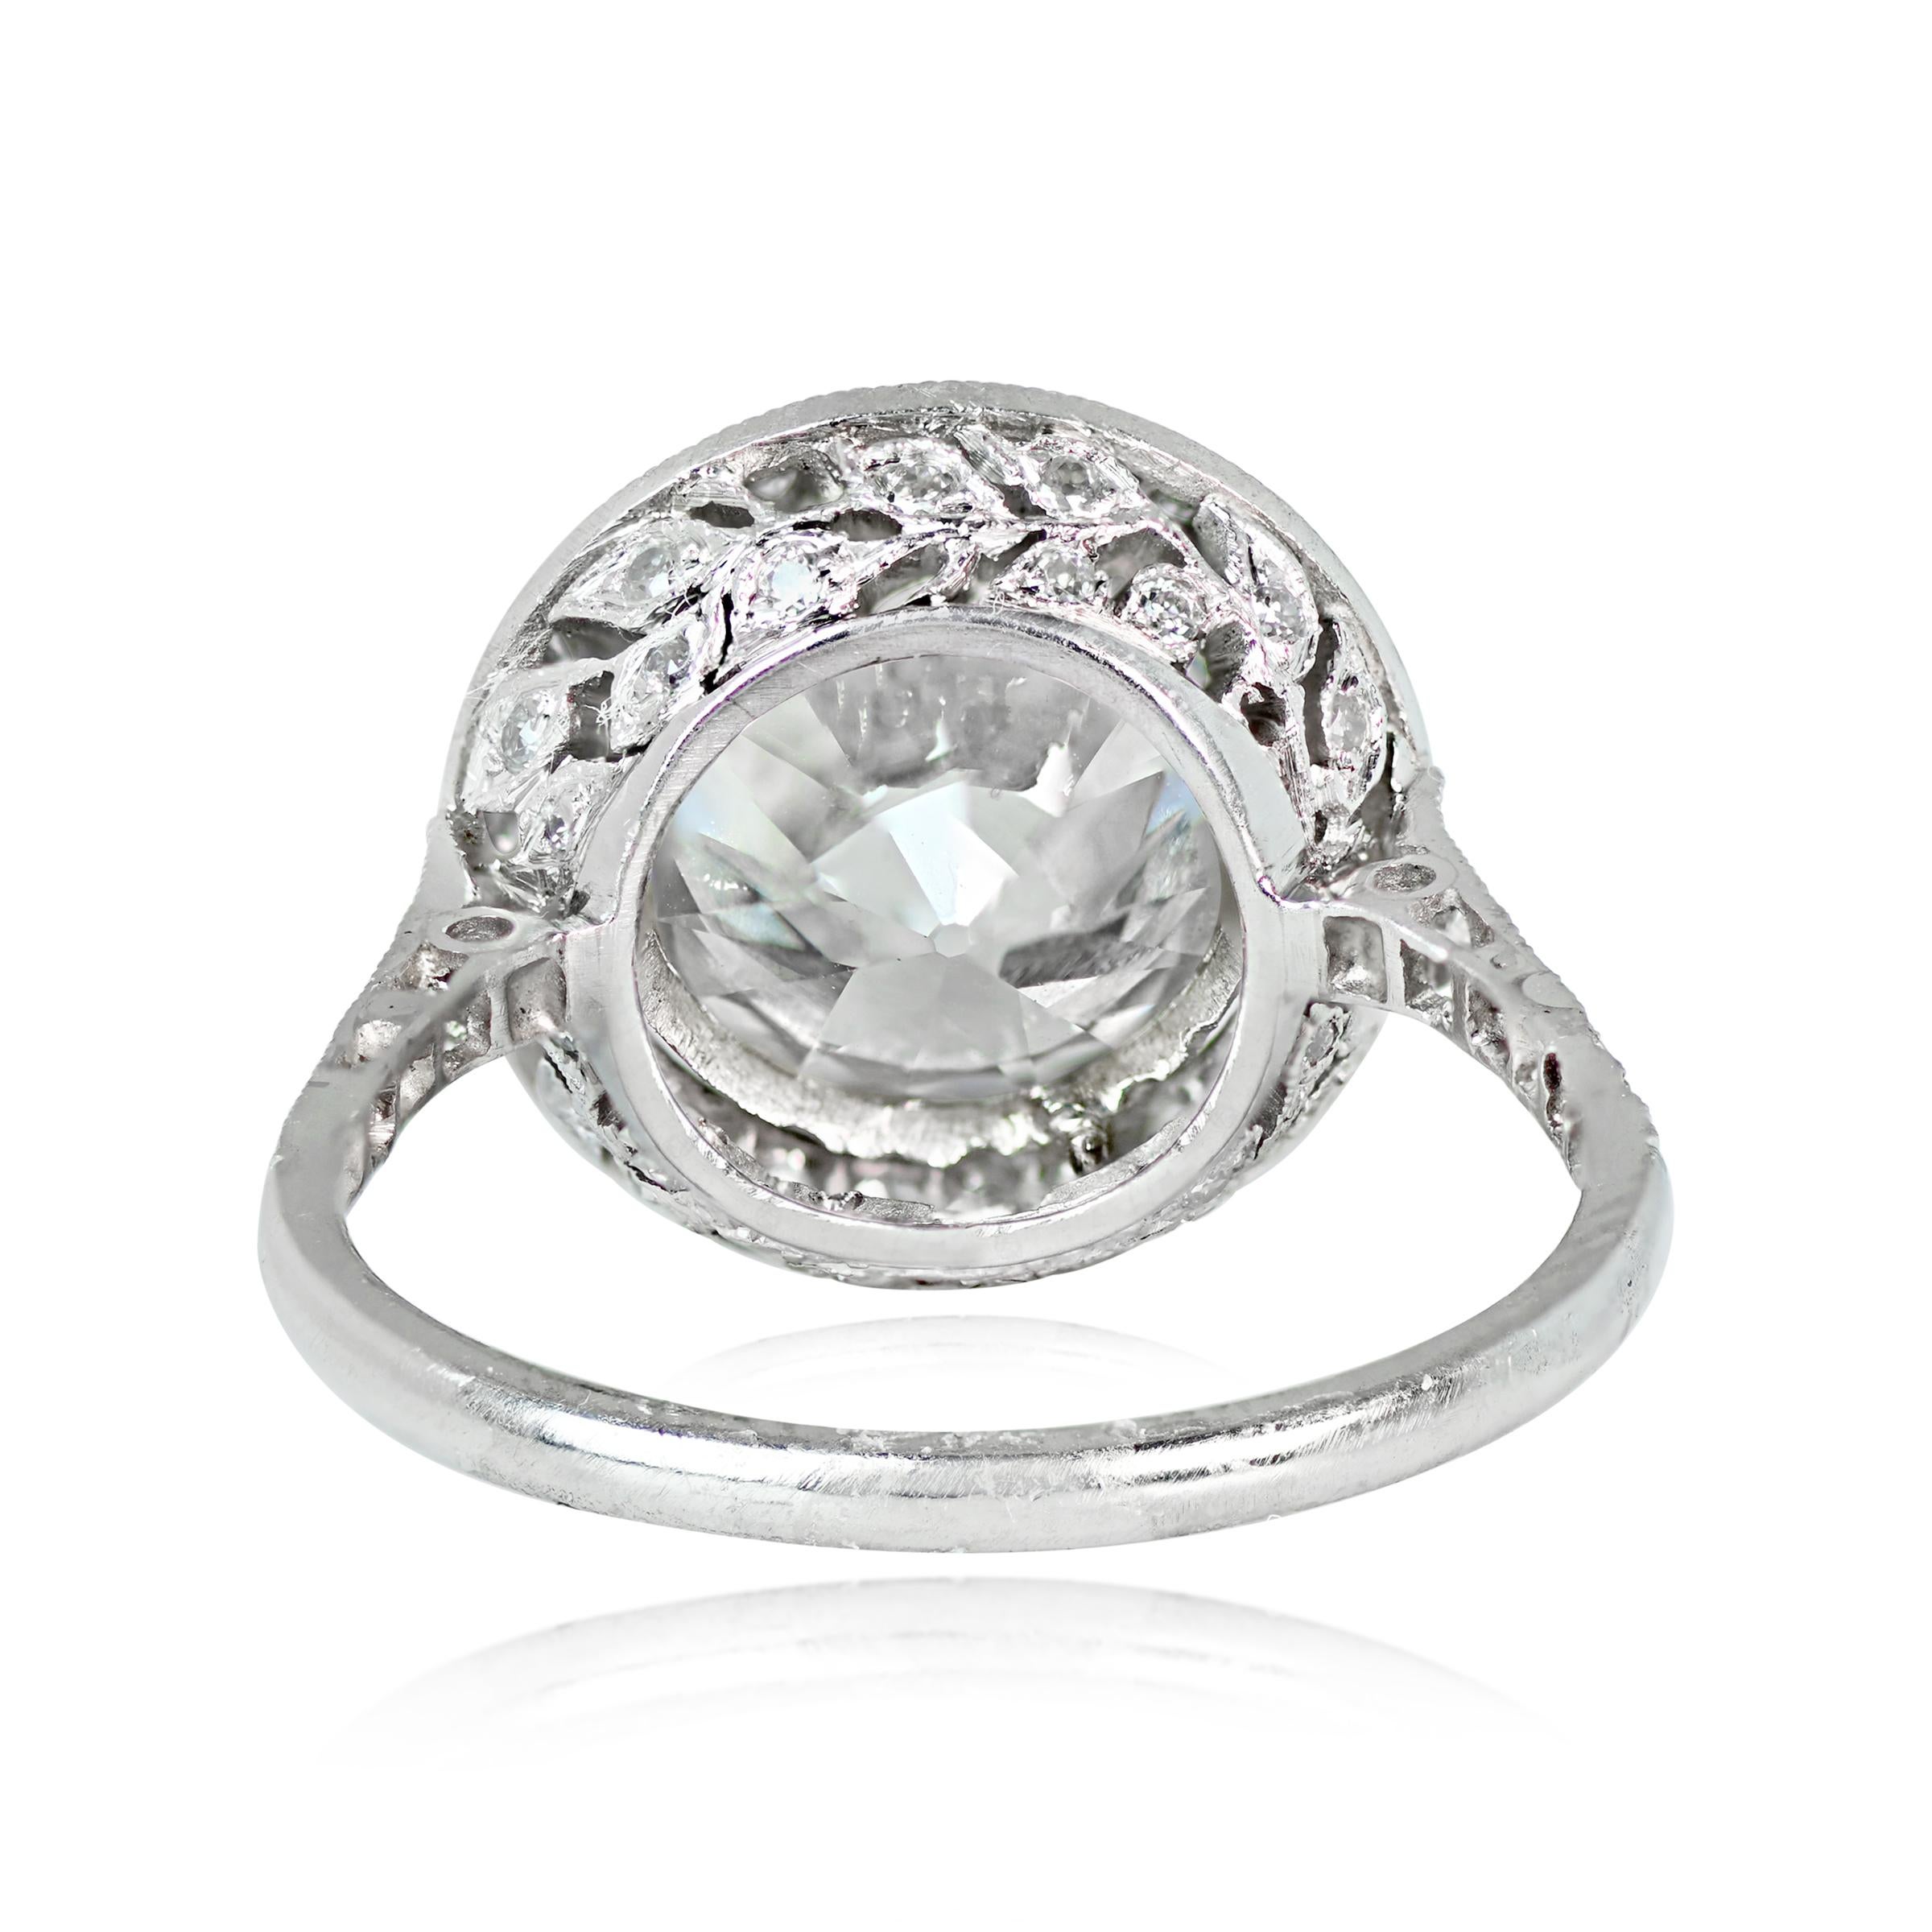 Art Deco 4.37 Ct Old European Cut Diamond Engagement Ring with Pave-Set Halo and Delicate For Sale